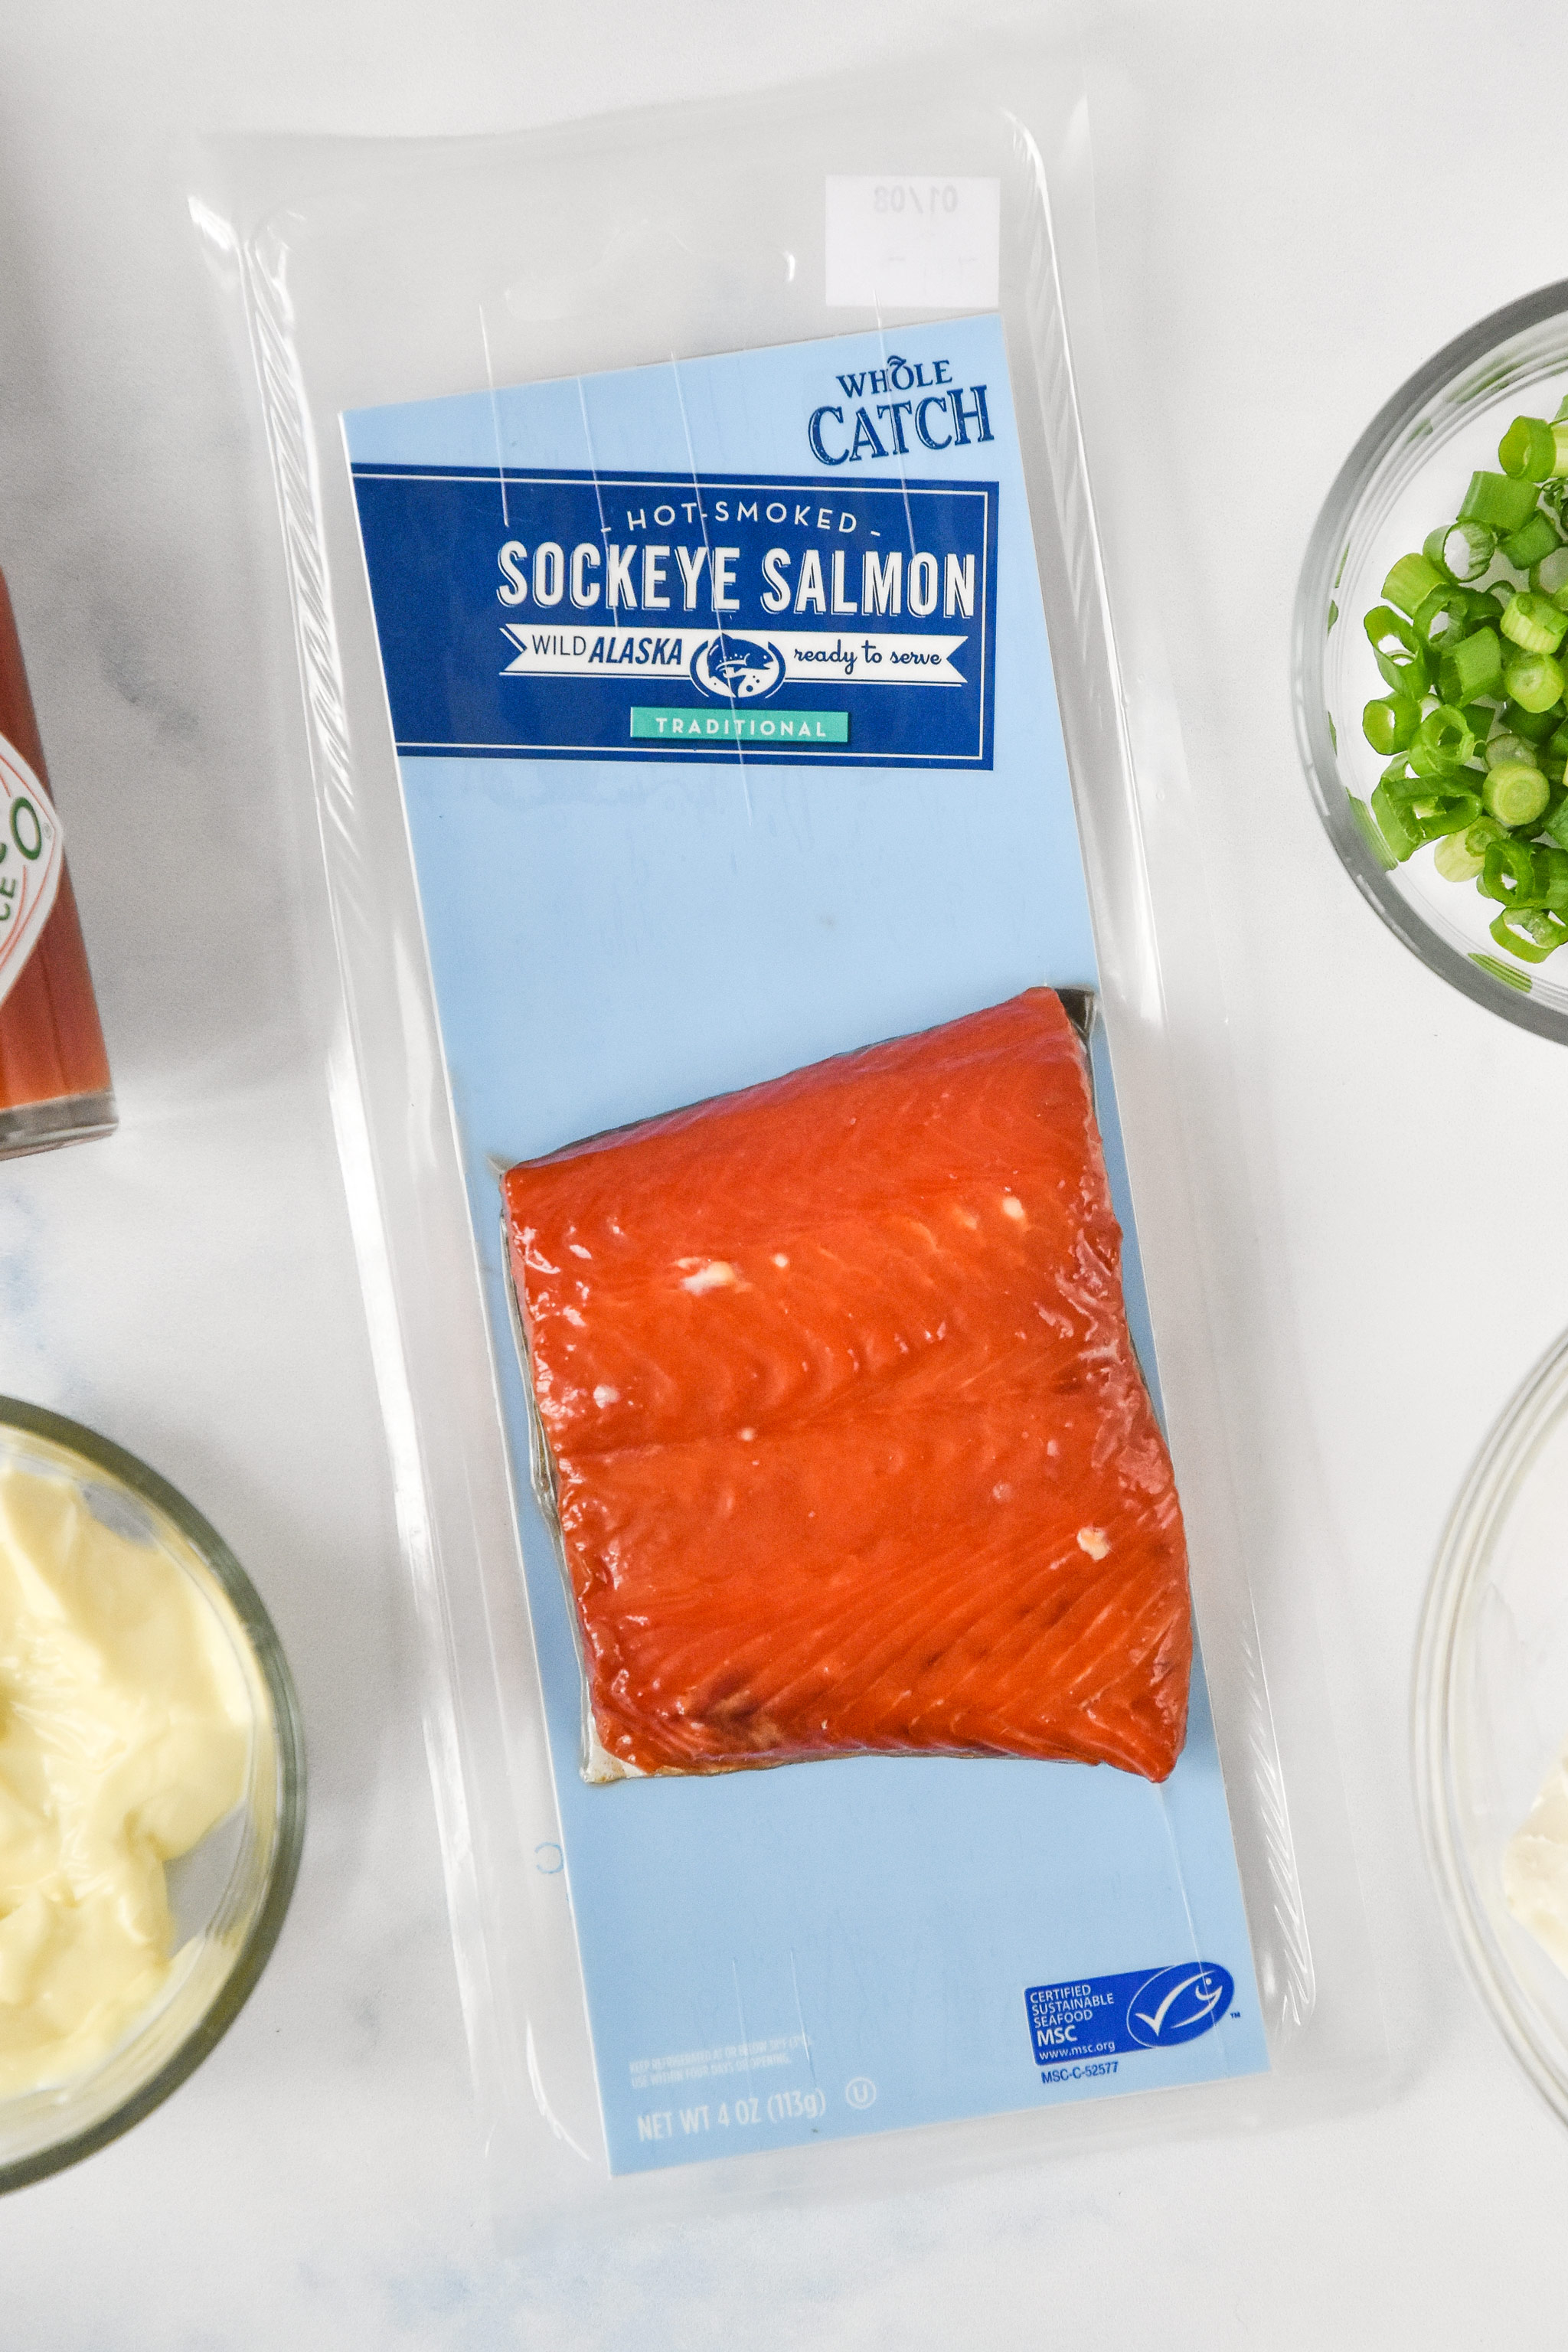 close up of the package of the smoked salmon.